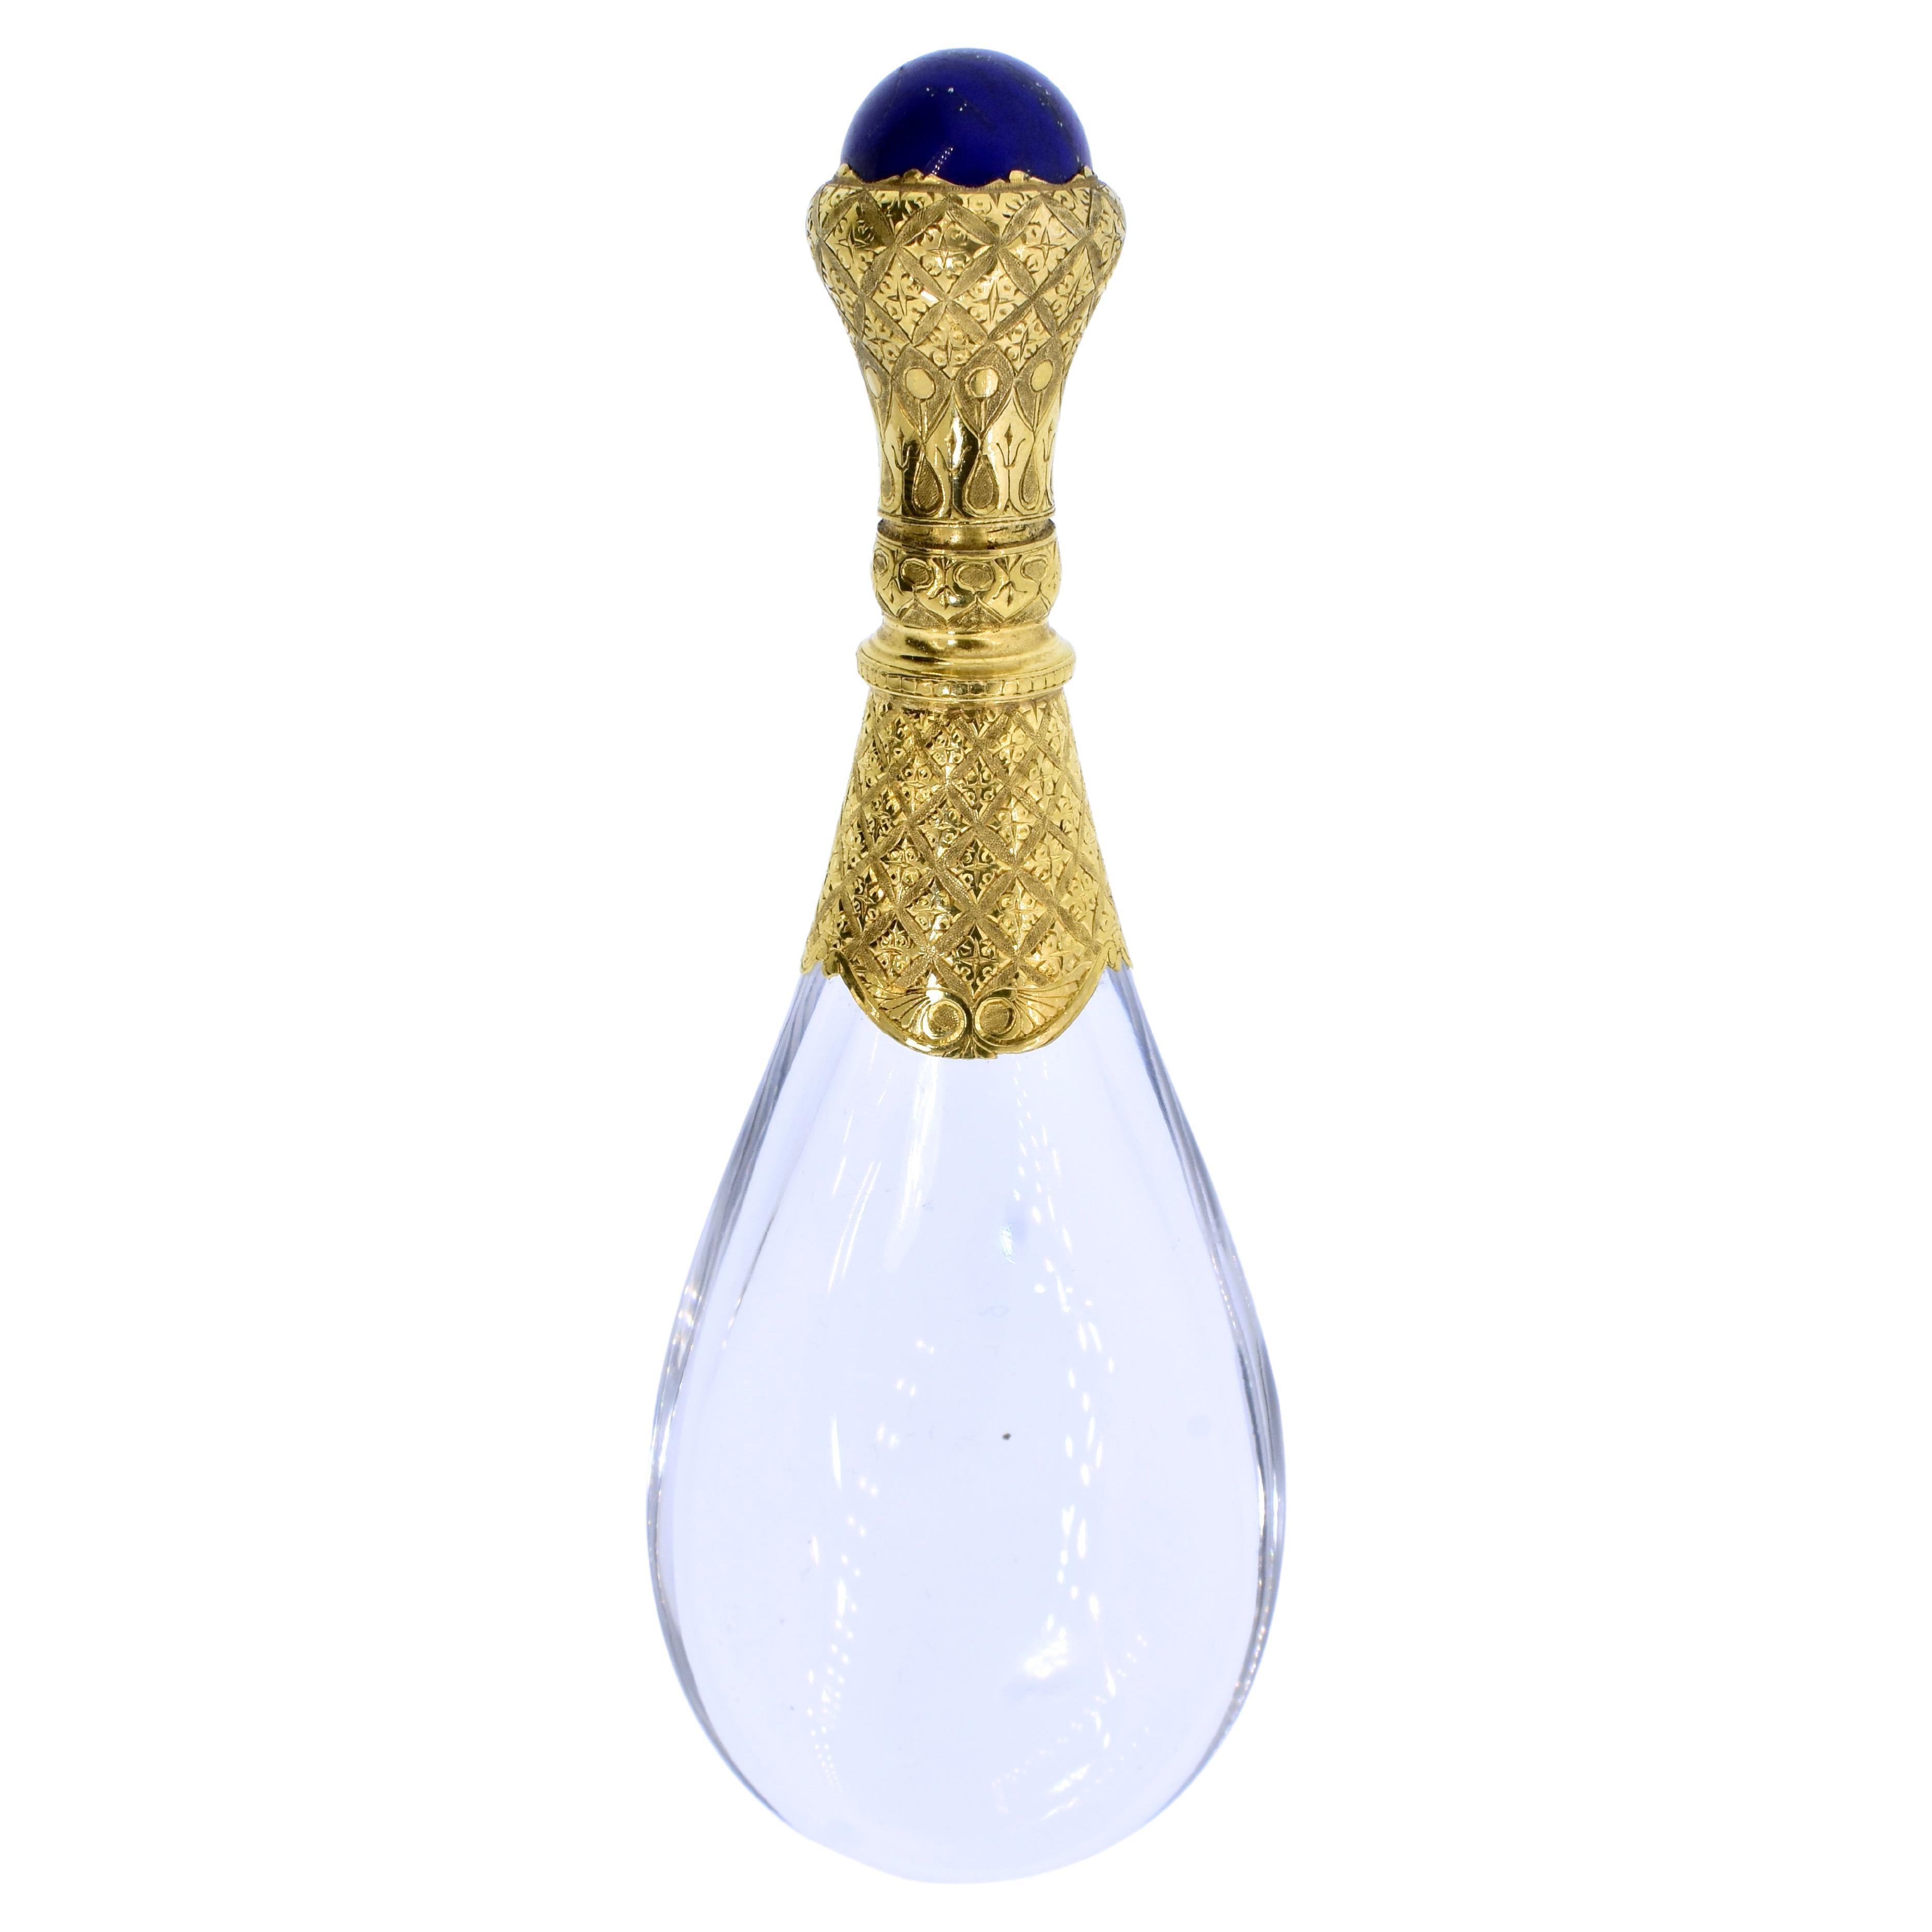 Antique French 18K, Lapis & Rock Crystal Perfume Bottle, Auguste Fraumont, 1850 For Sale